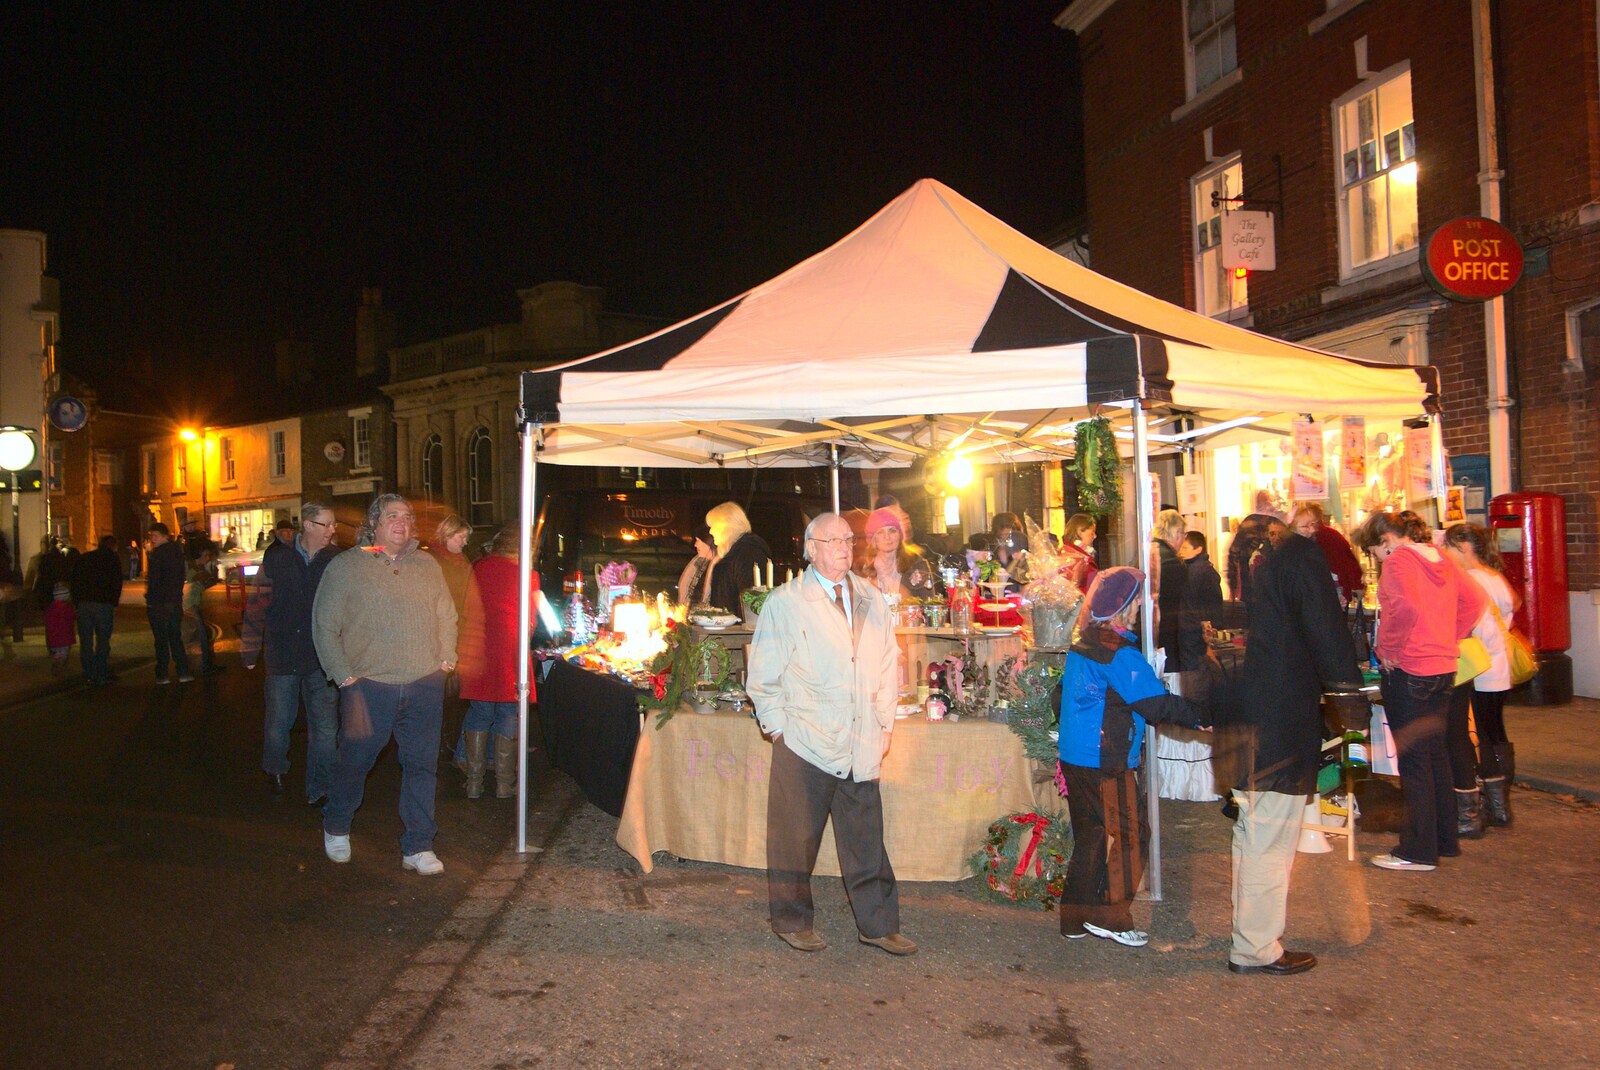 A stall by the post office from The Christmas Lights Switch-On, Eye, Suffolk - 2nd December 2011